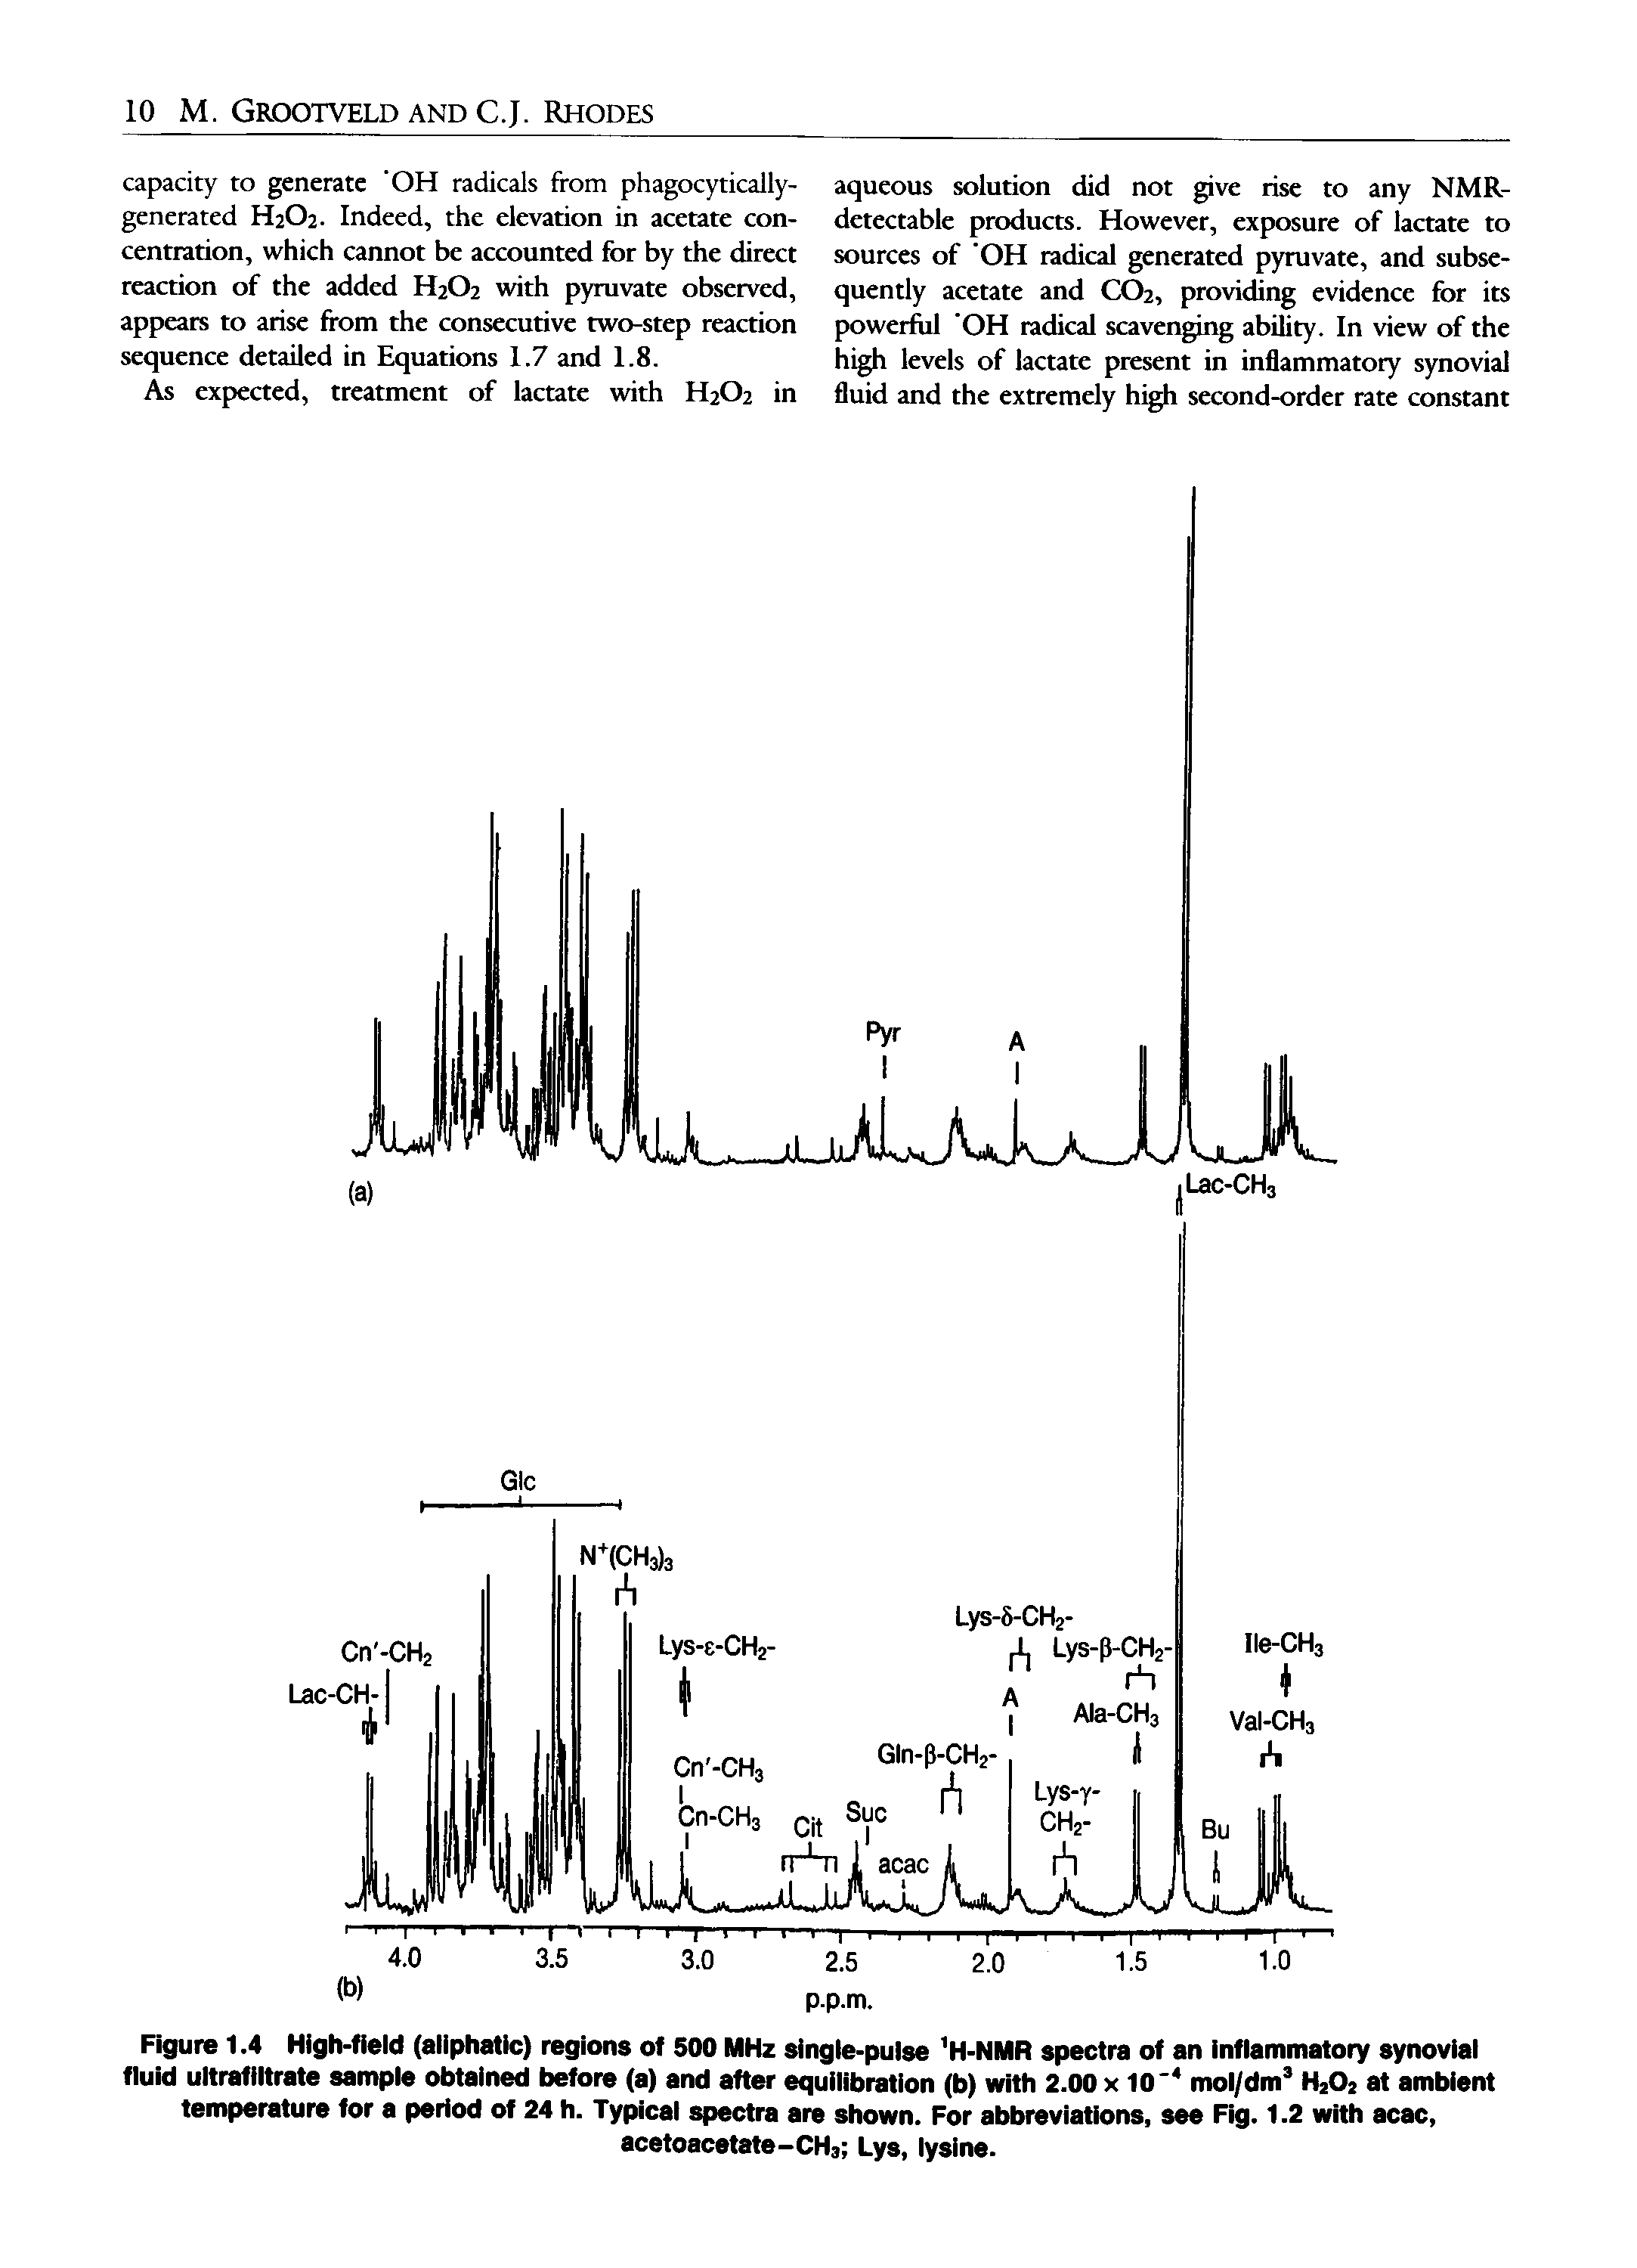 Figure 1.4 High-field (aliphatic) regions of 500 MHz single-pulse H-NMR spectra of an inflammatory synovial fluid ultrafiltrate sample obtained before (a) and after equilibration (b) with 2.00 x 10 mol/dm H2O2 at ambient temperature for a period of 24 h. Typical spectra are shown. For abbreviations, see Fig. 1.2 with acac,...